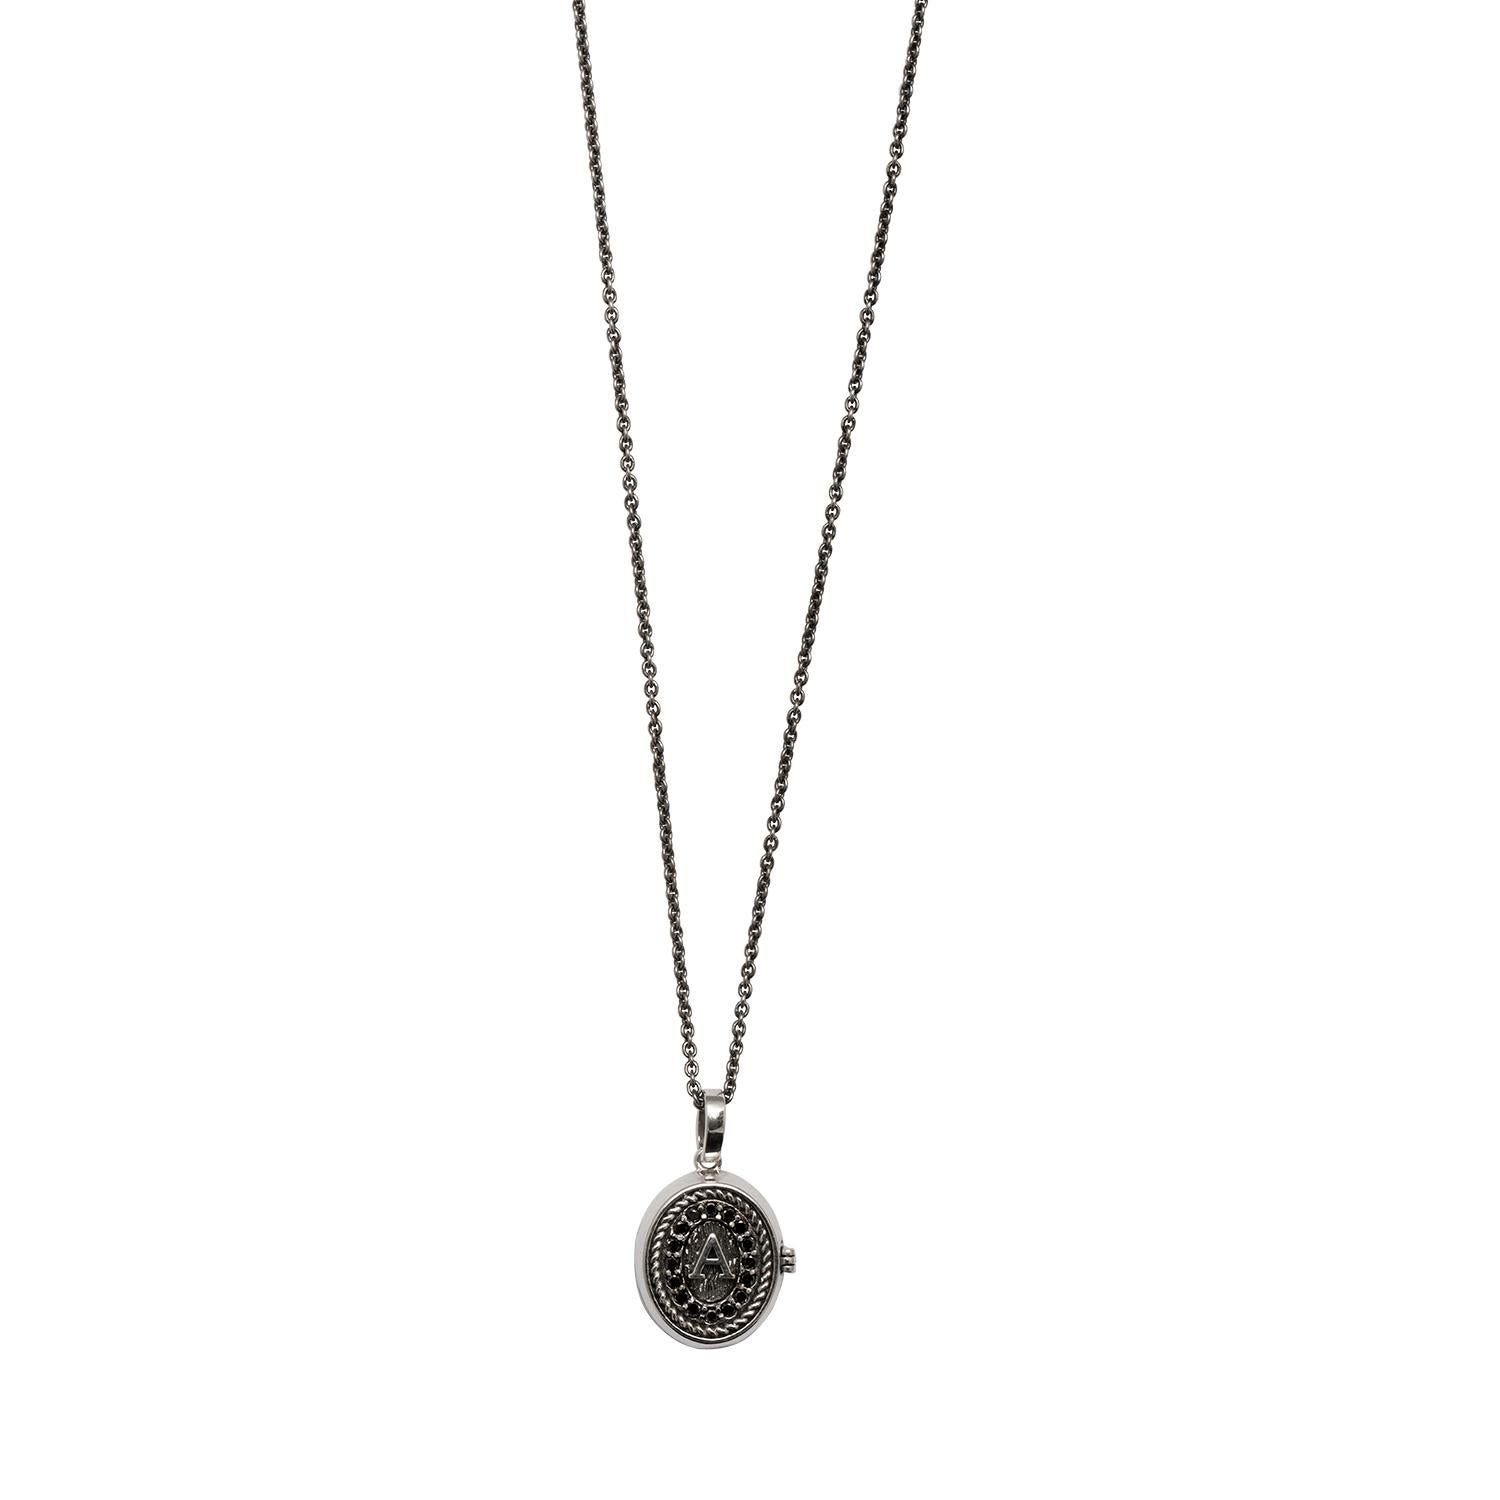 Contemporary Locket Necklace with Initials in Silver and Black Diamond Pavé from Iosselliani For Sale